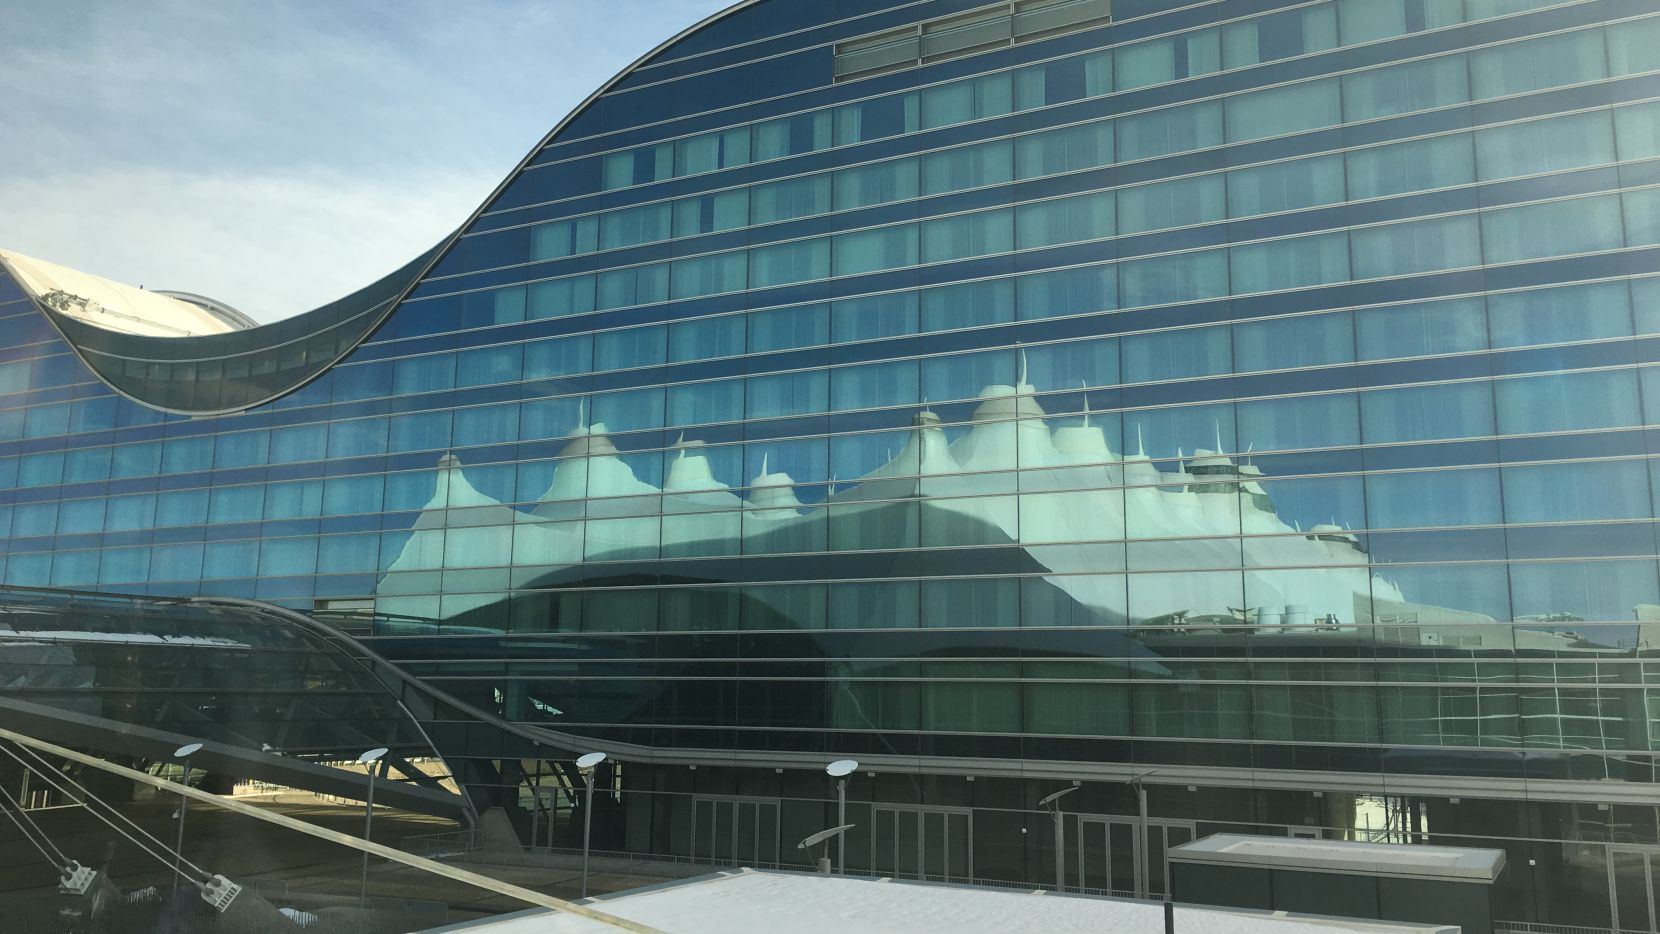 Reflection of the Denver terminal in the windows of its Westin hotel.